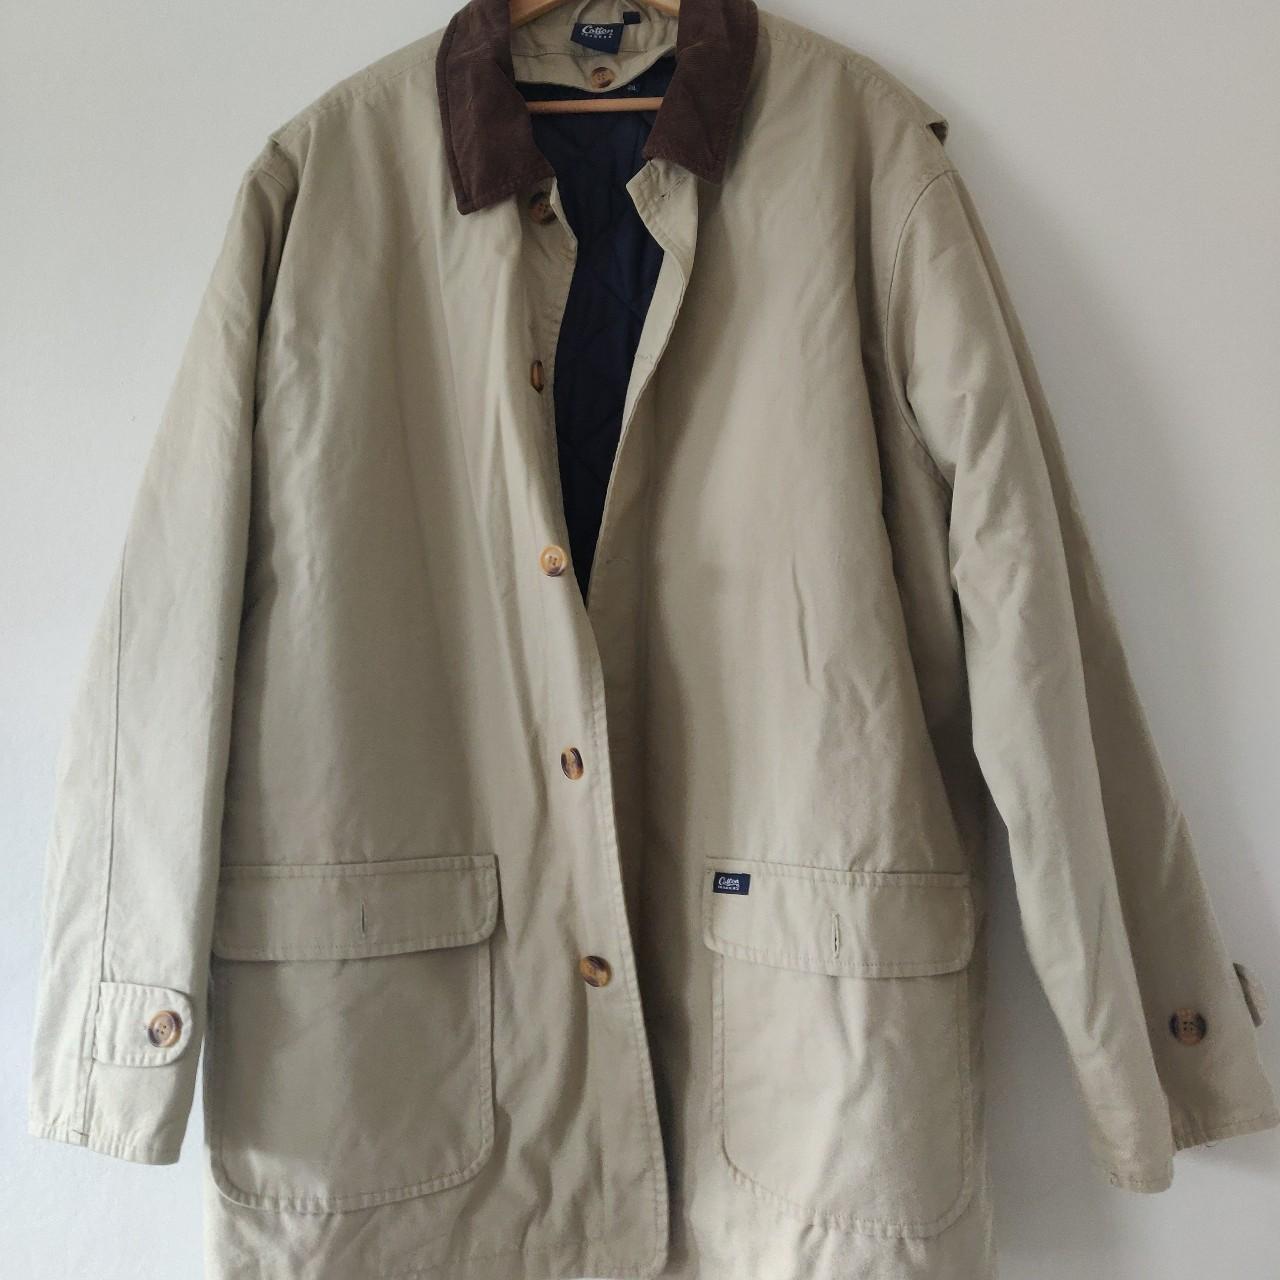 Cotton Traders Jacket in Cream XXL (XL) Really nice... - Depop